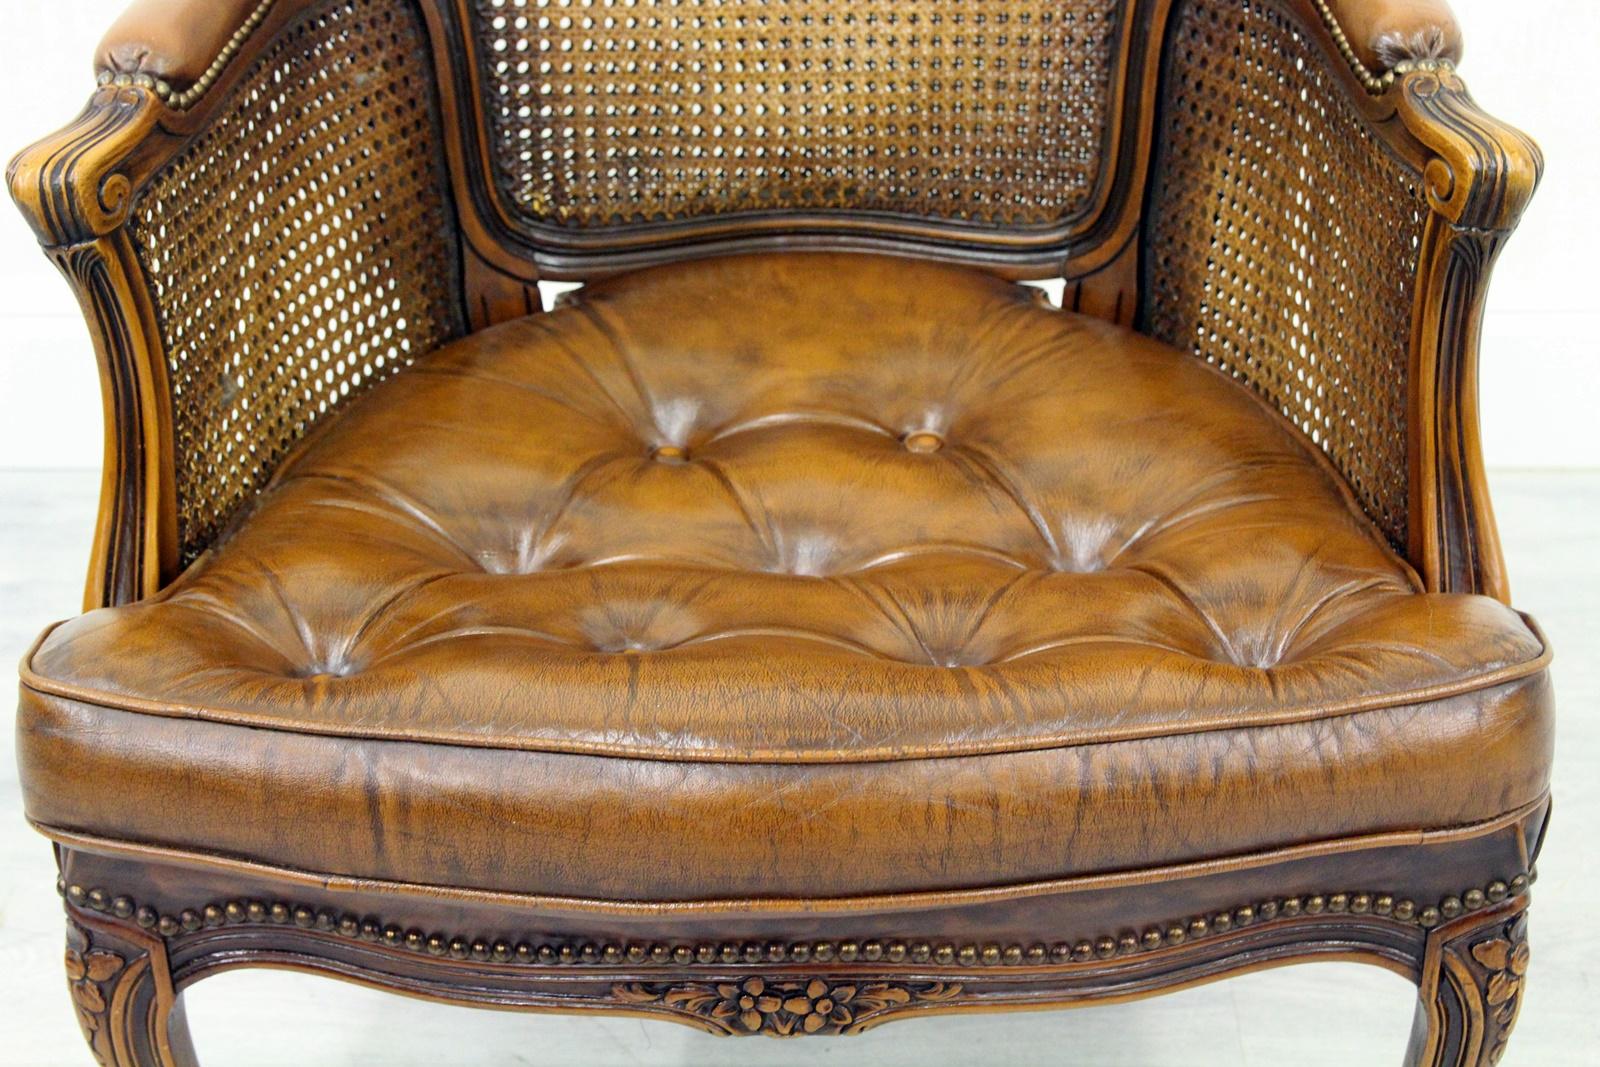 Chippendale leather chair
Preiss hard!
Chair
Measures: Height 96 cm, width 70 cm, depth 75 cm
Condition: The armchair is in good condition for the age and still has the charm of the 